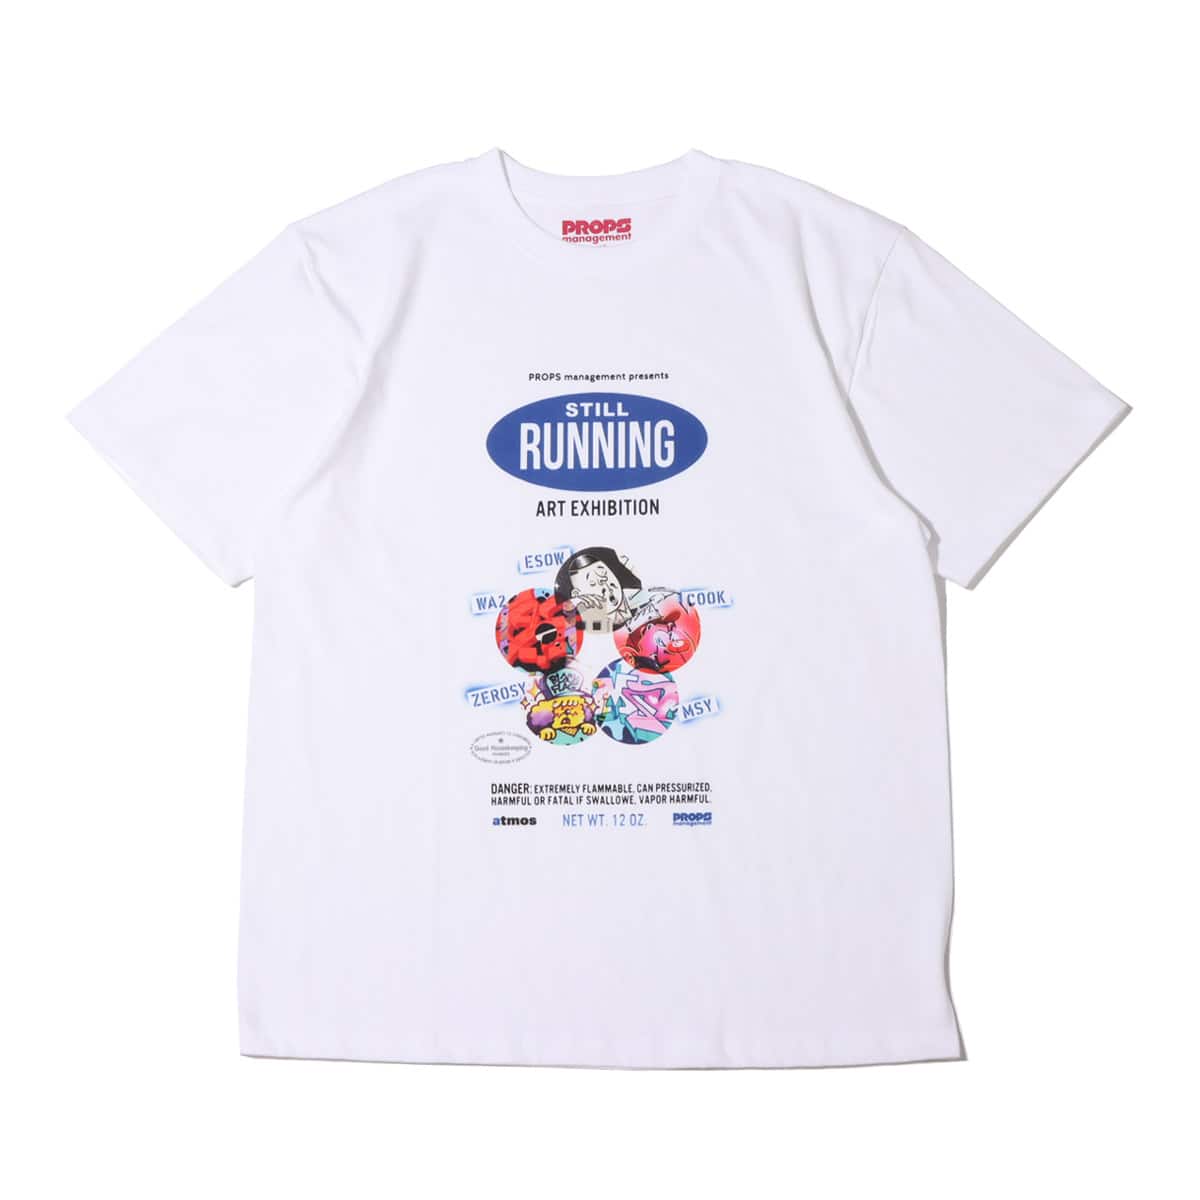 PROPS management "STILL RUNNING" FLYER S/S TEE WHITE 21SU-I_photo_large